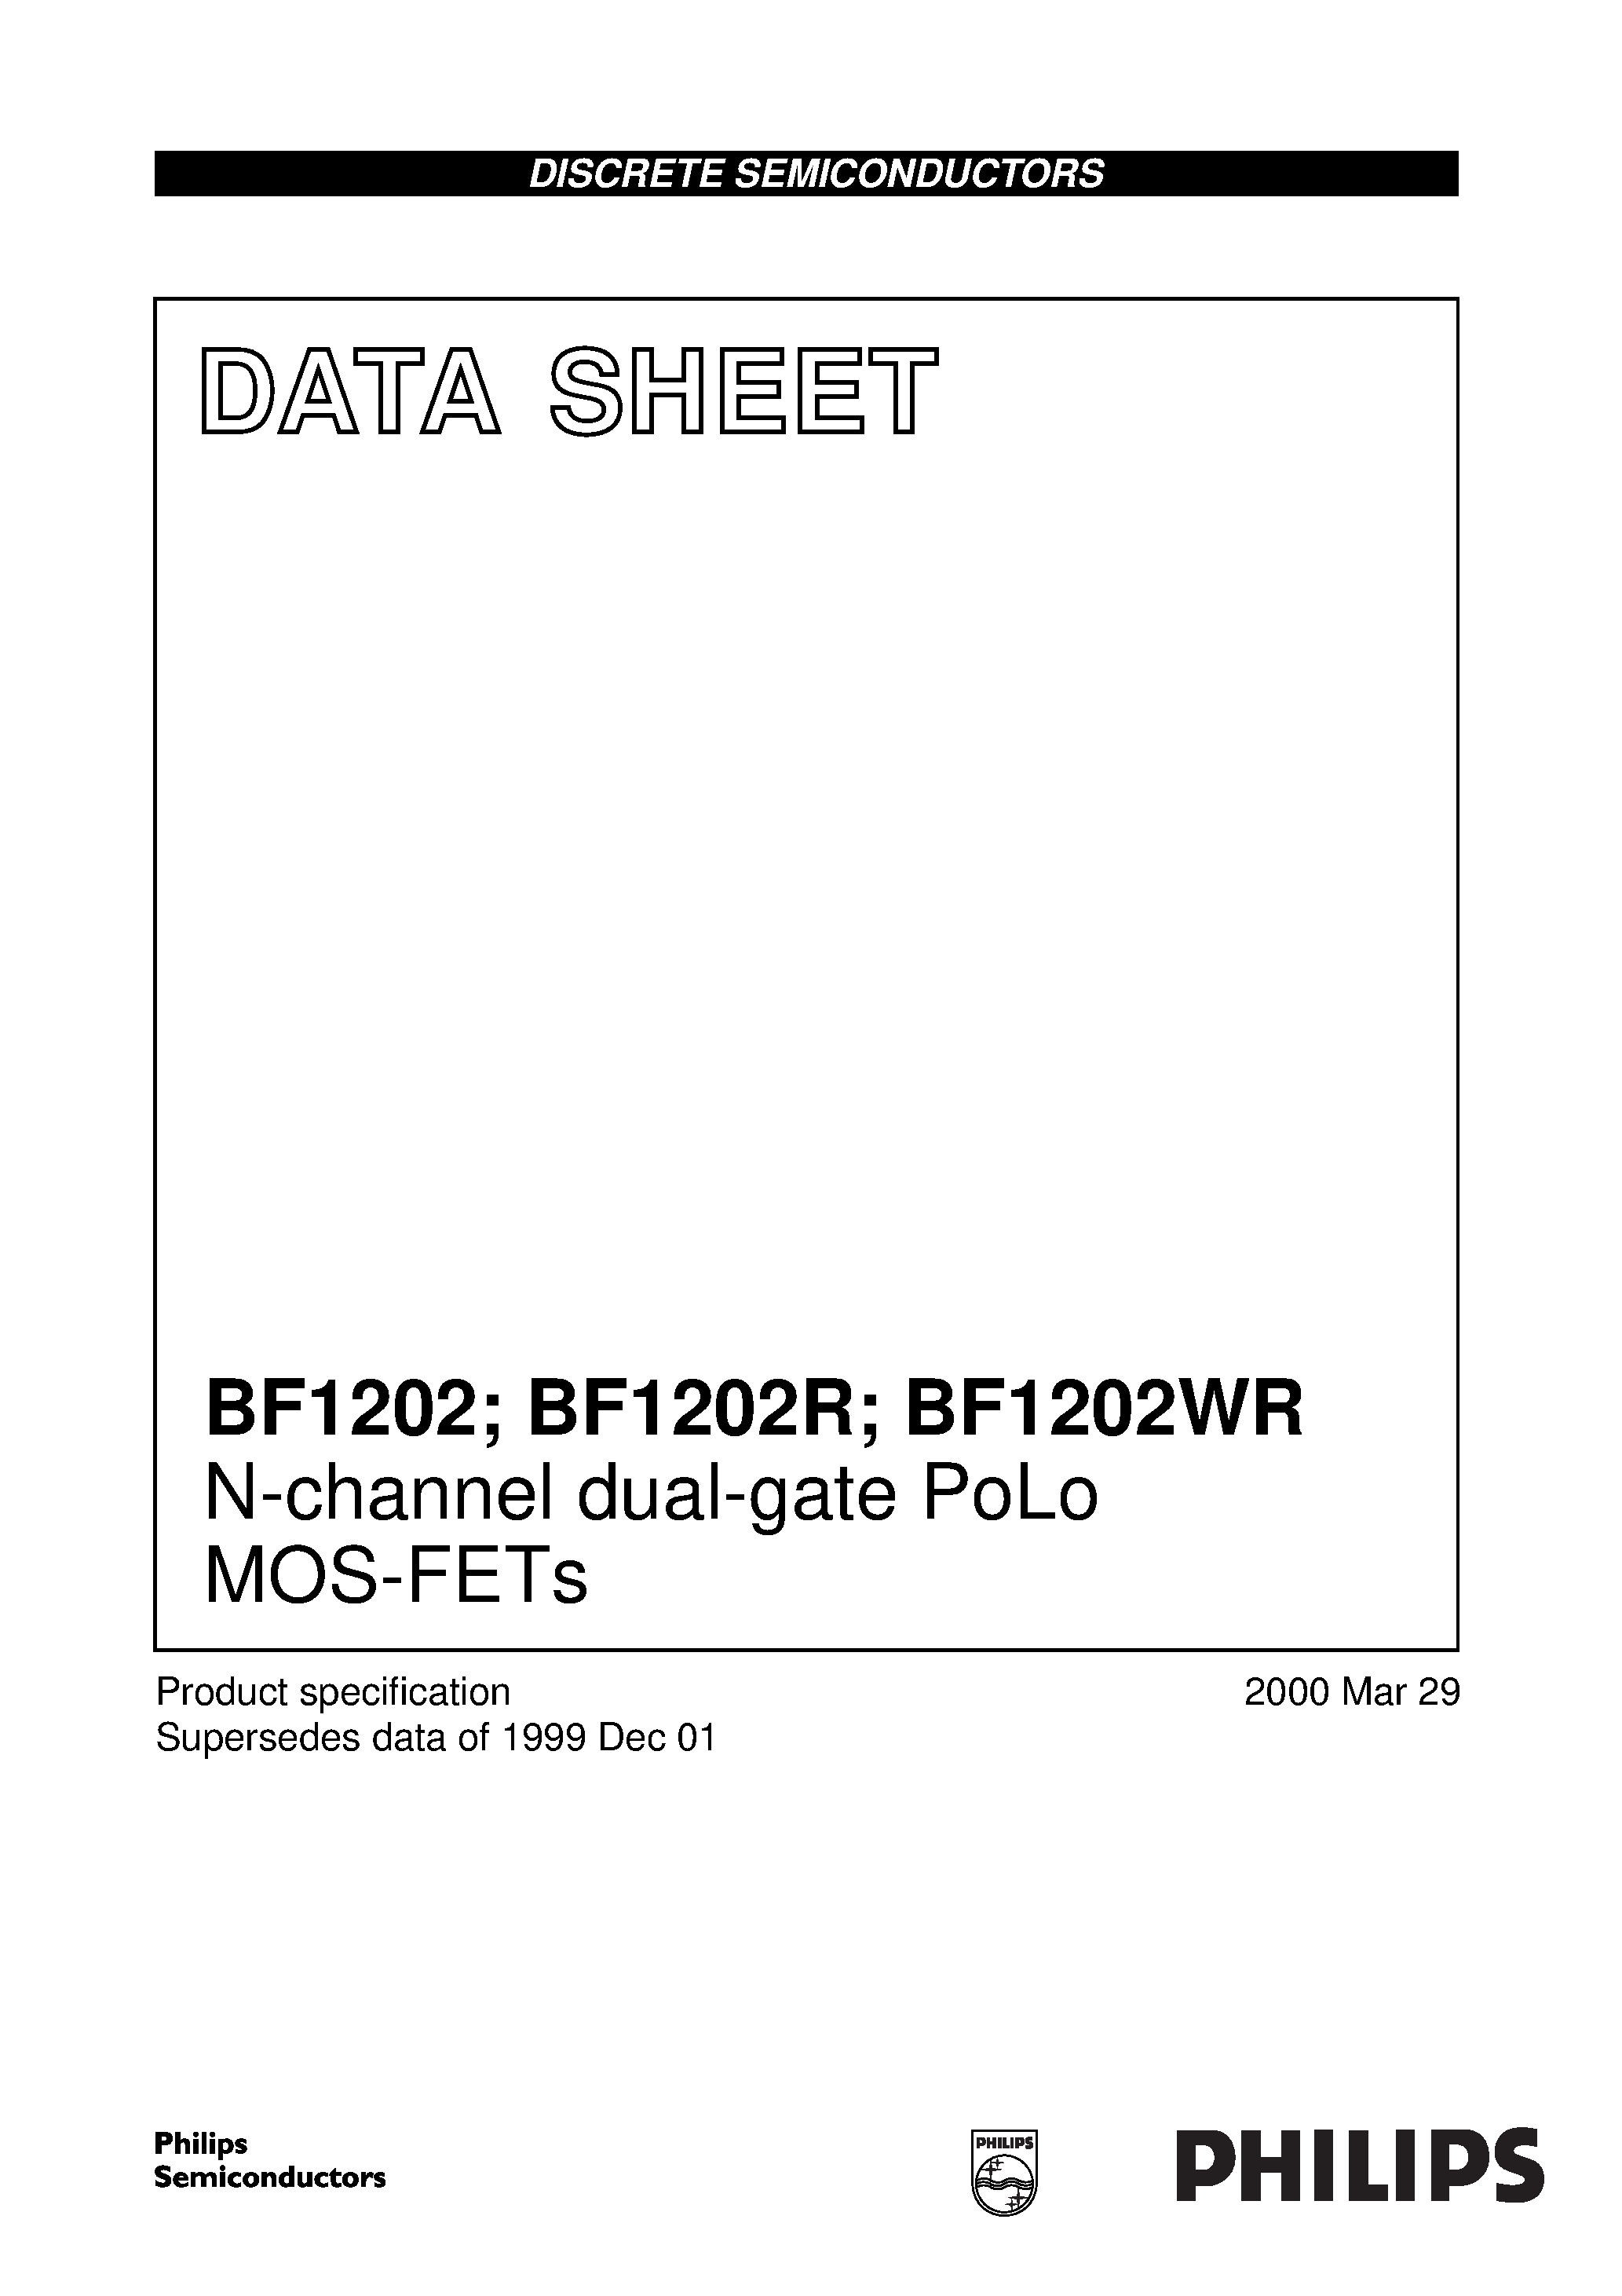 Datasheet BF1202WR - N-channel dual-gate PoLo MOS-FETs page 1